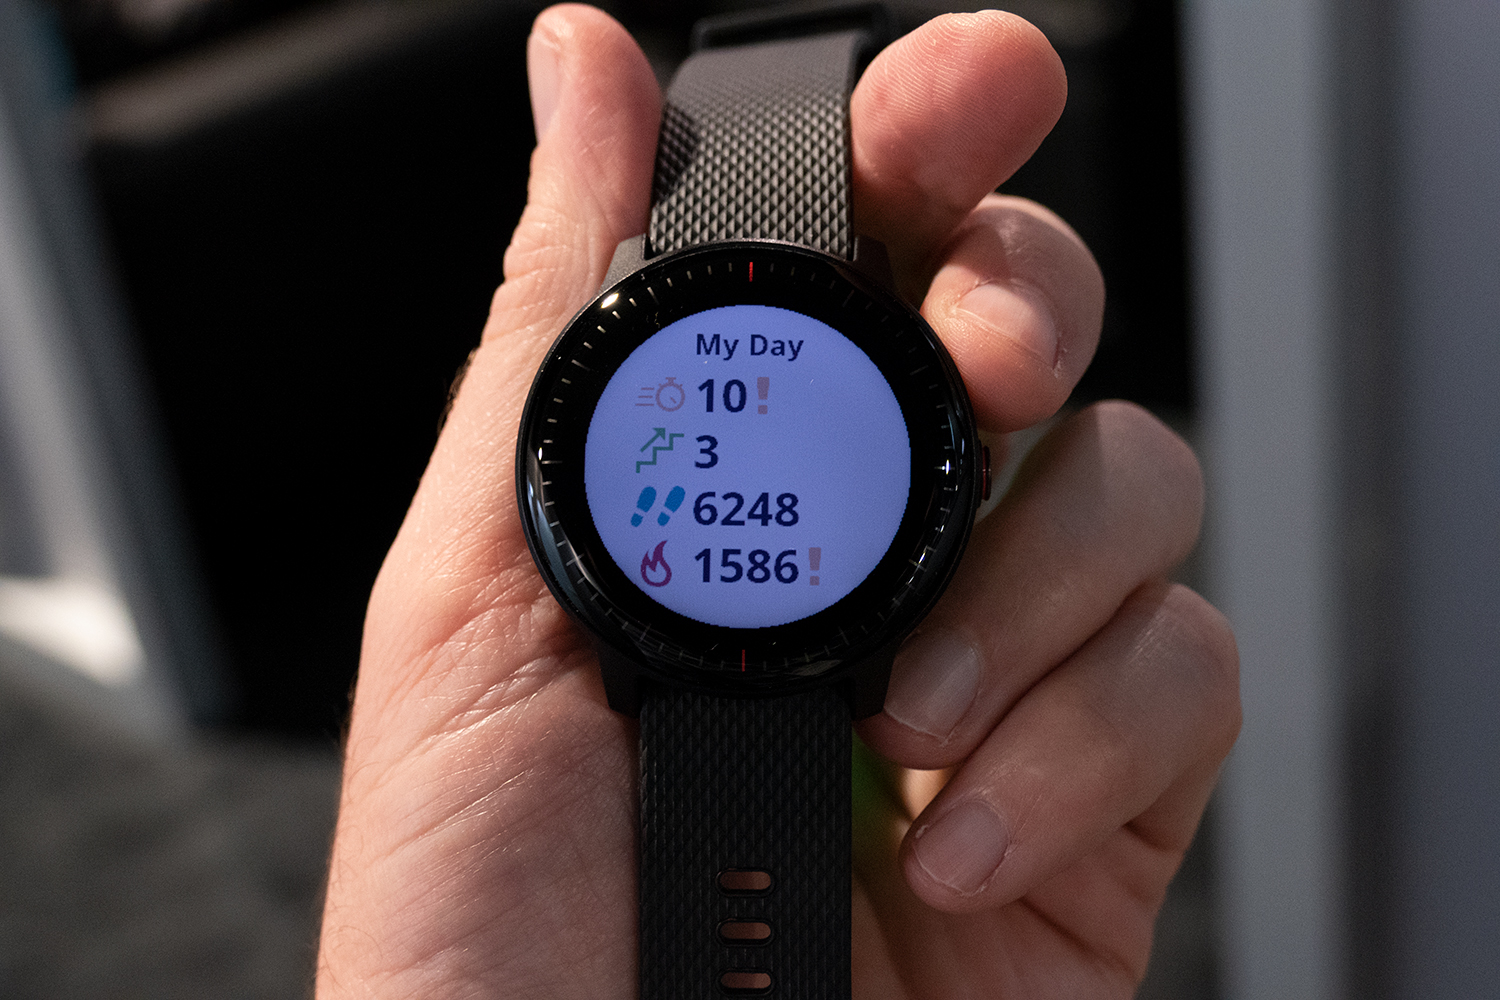 Garmin's new Vivoactive 3 Music is the best competitor to the